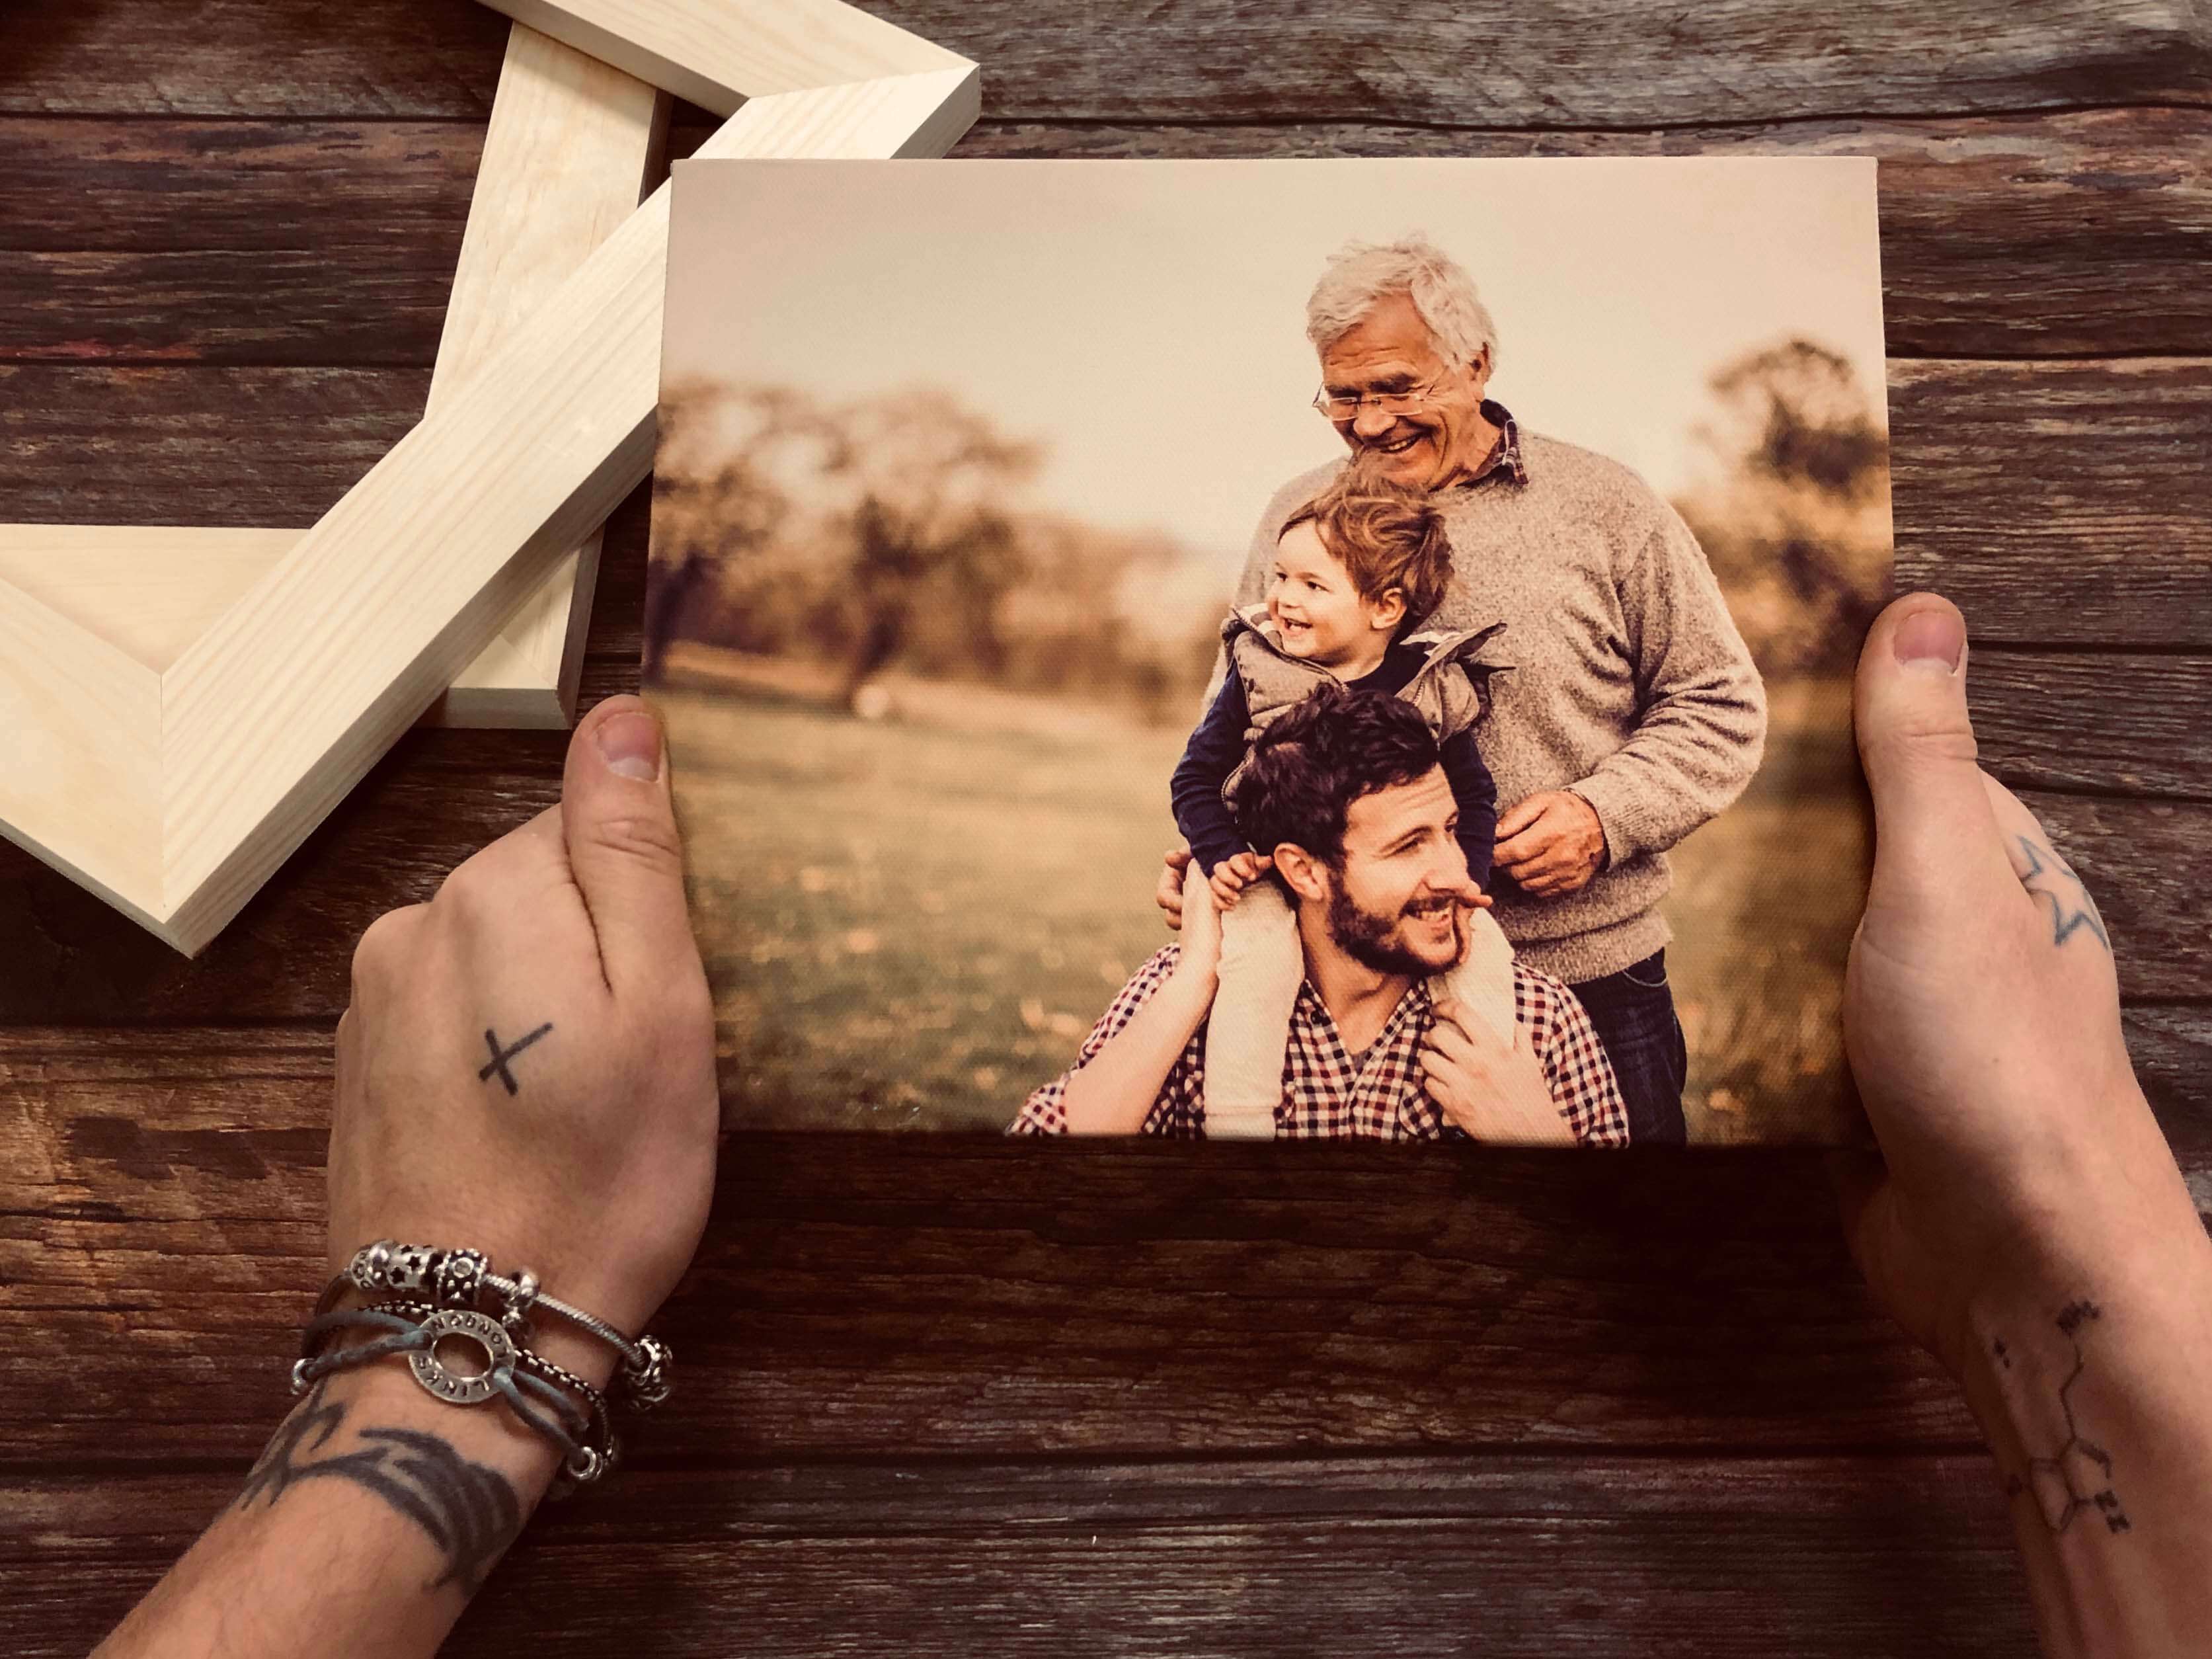 Three generations photograph and wall art ideas, grandad, father and son printed onto best canvas prints UK with next day delivery.